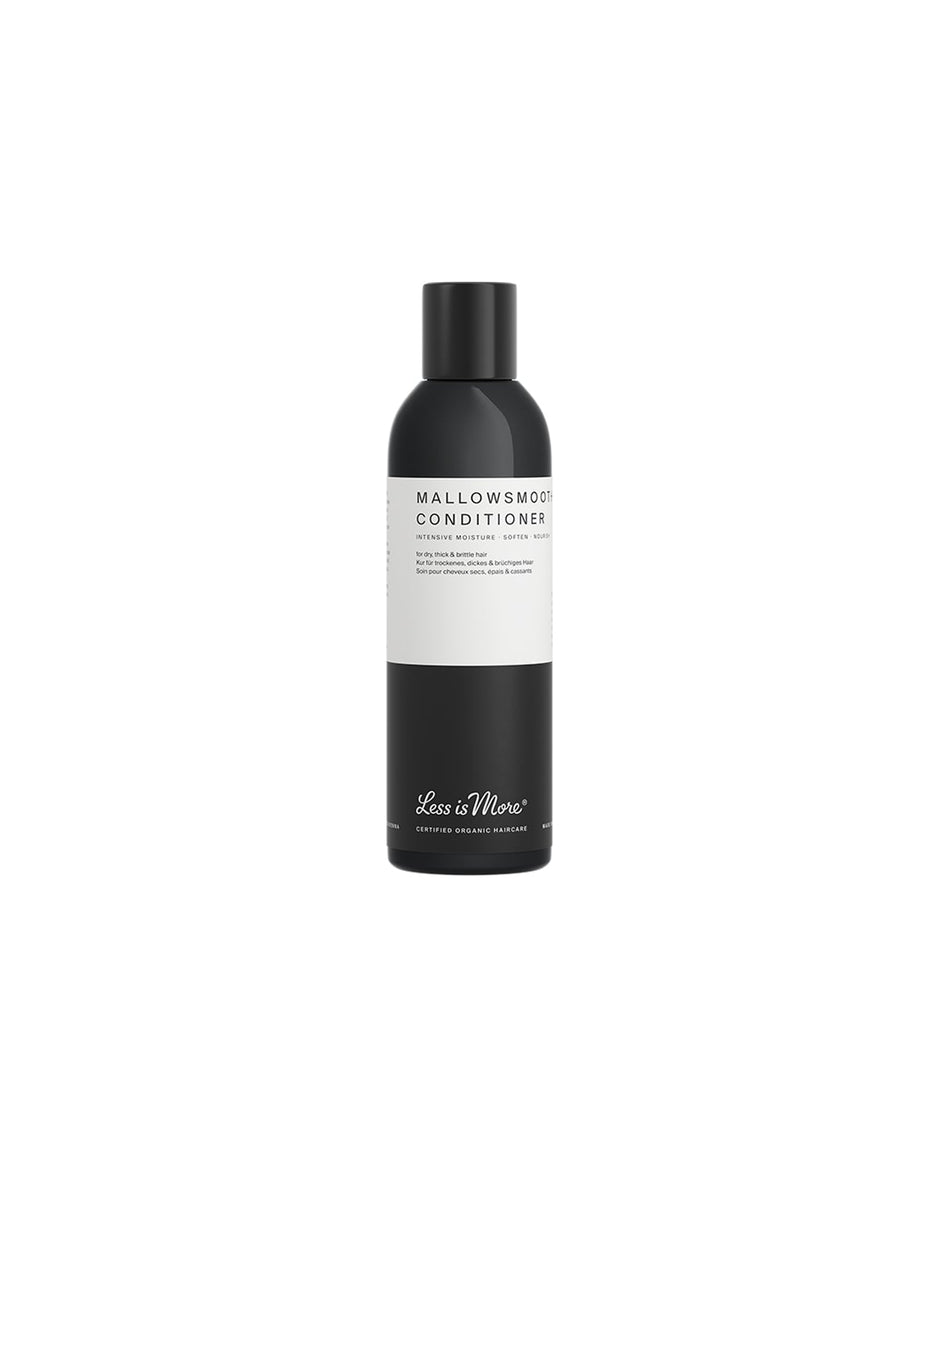 MALLOWSMOOTH CONDITIONER